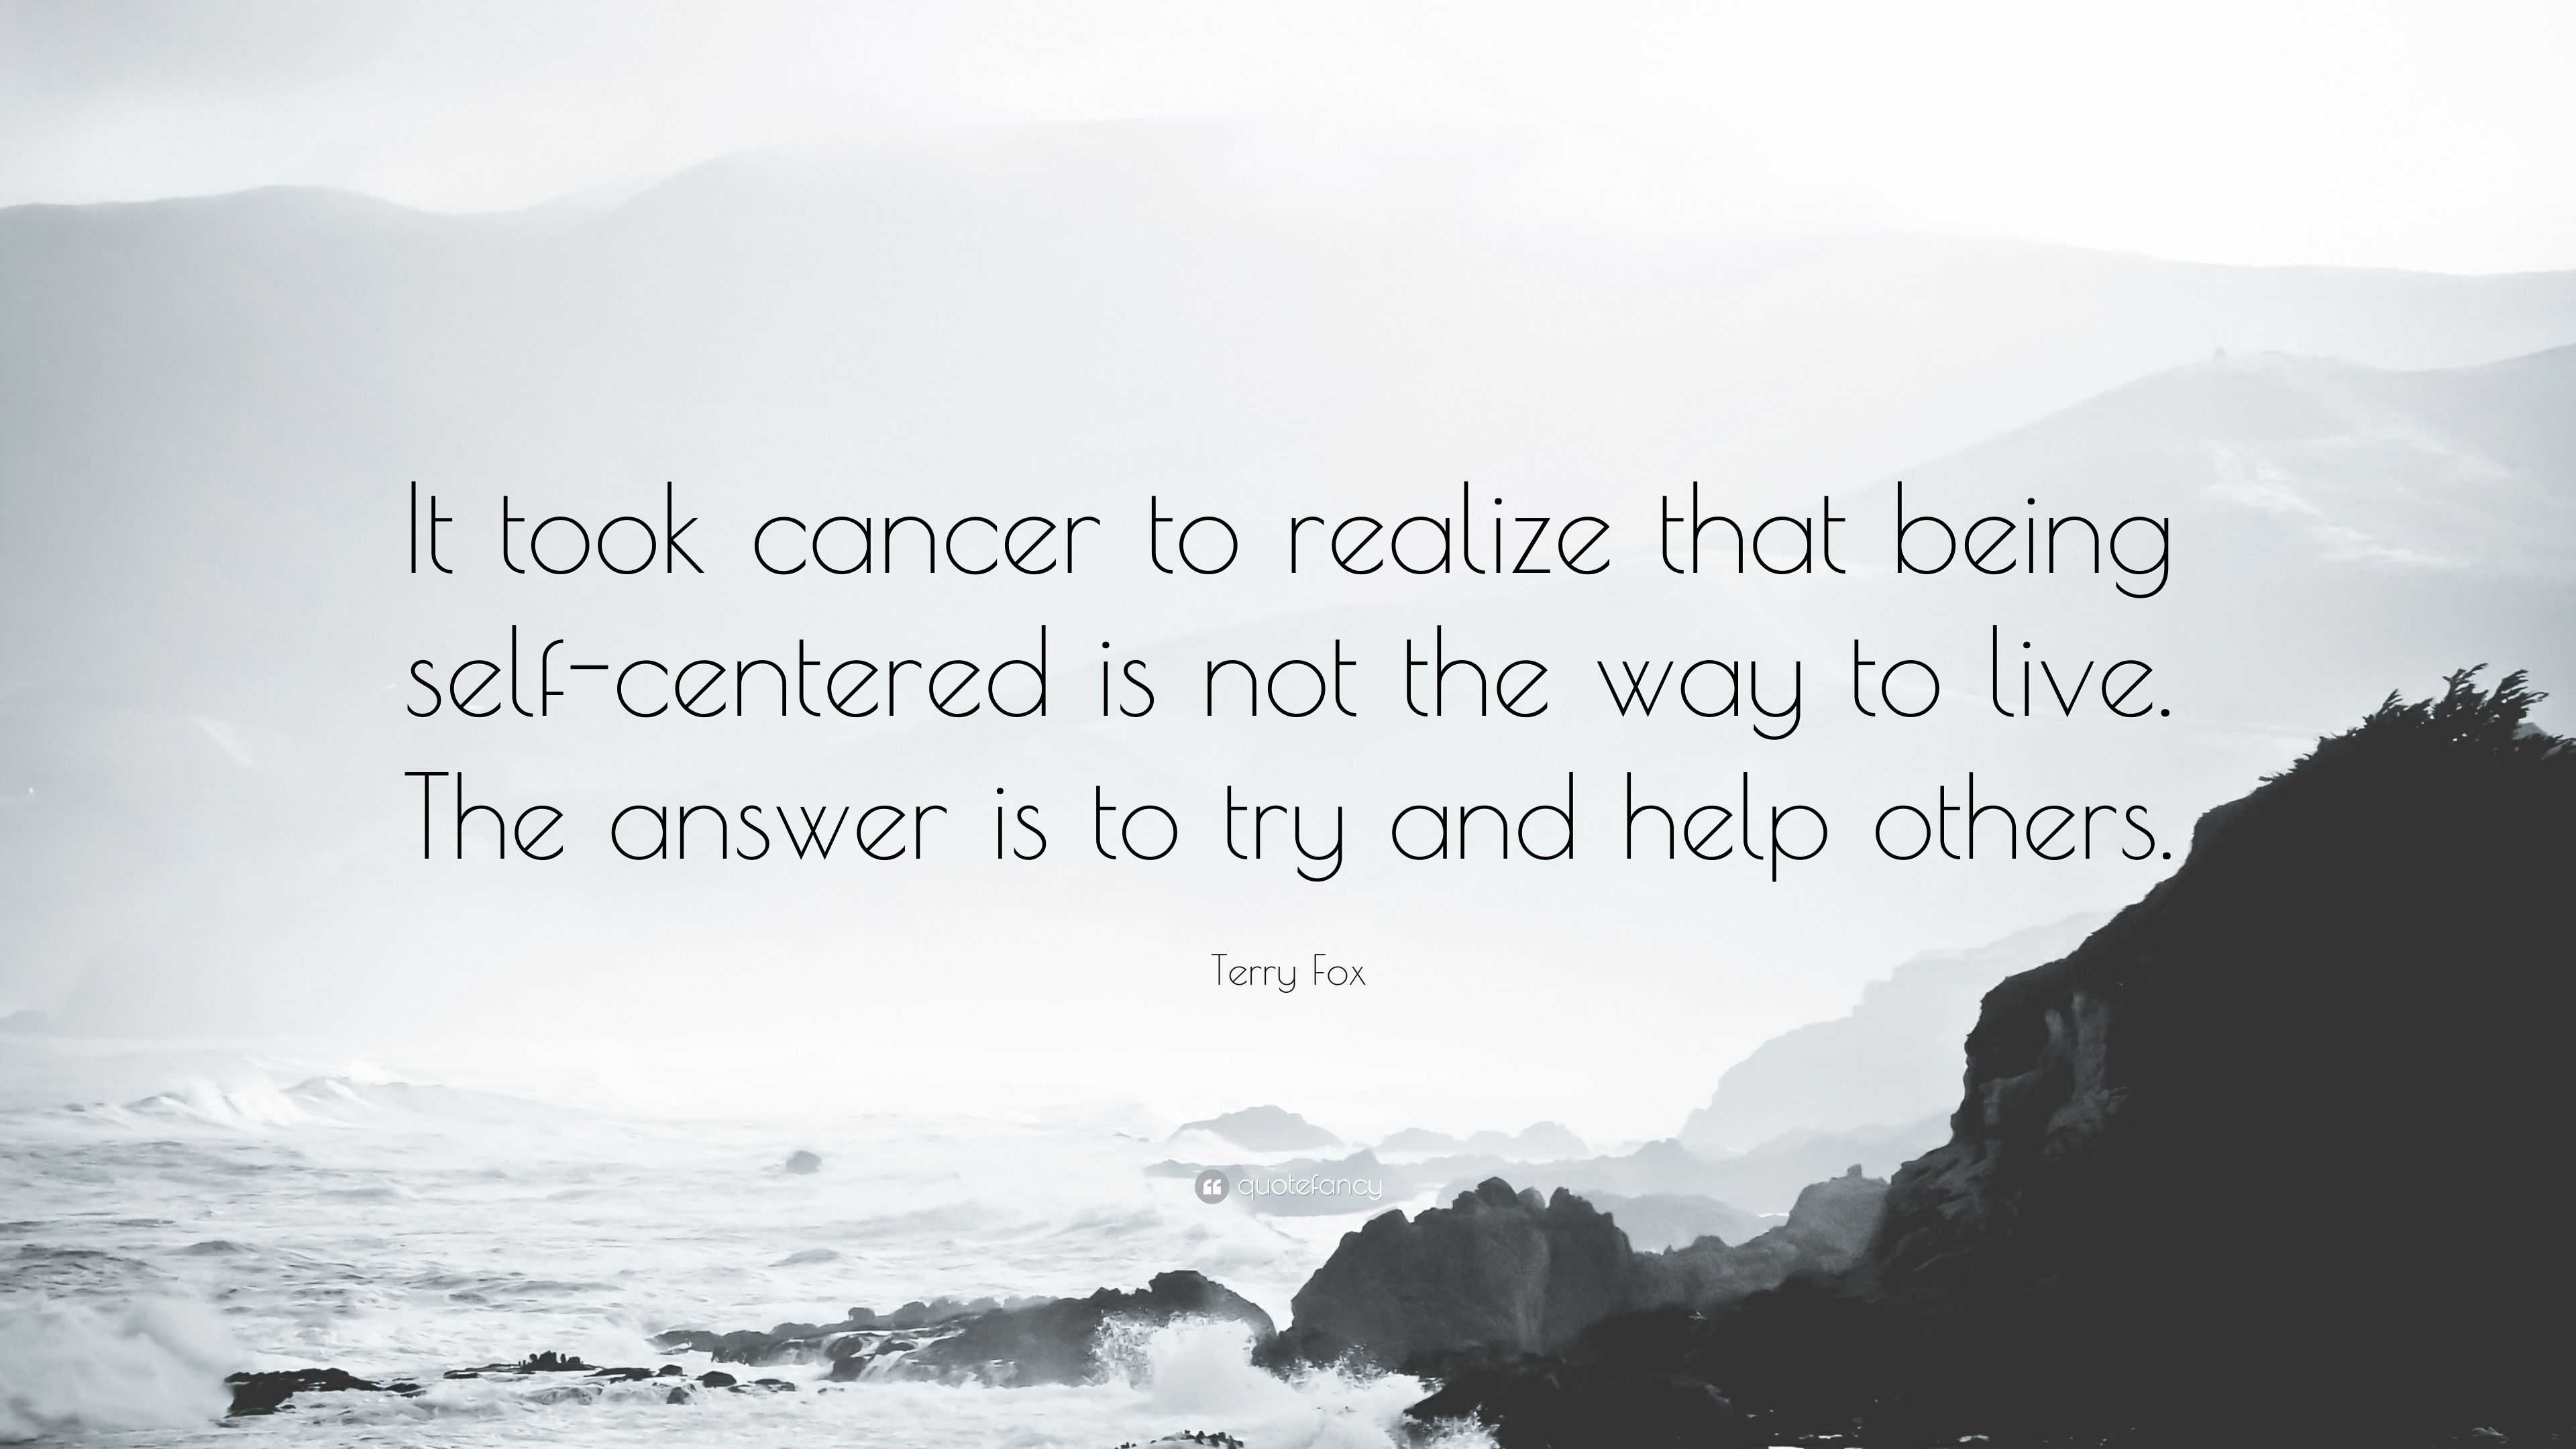 Terry Fox Quote: “It took cancer to realize that being self-centered is